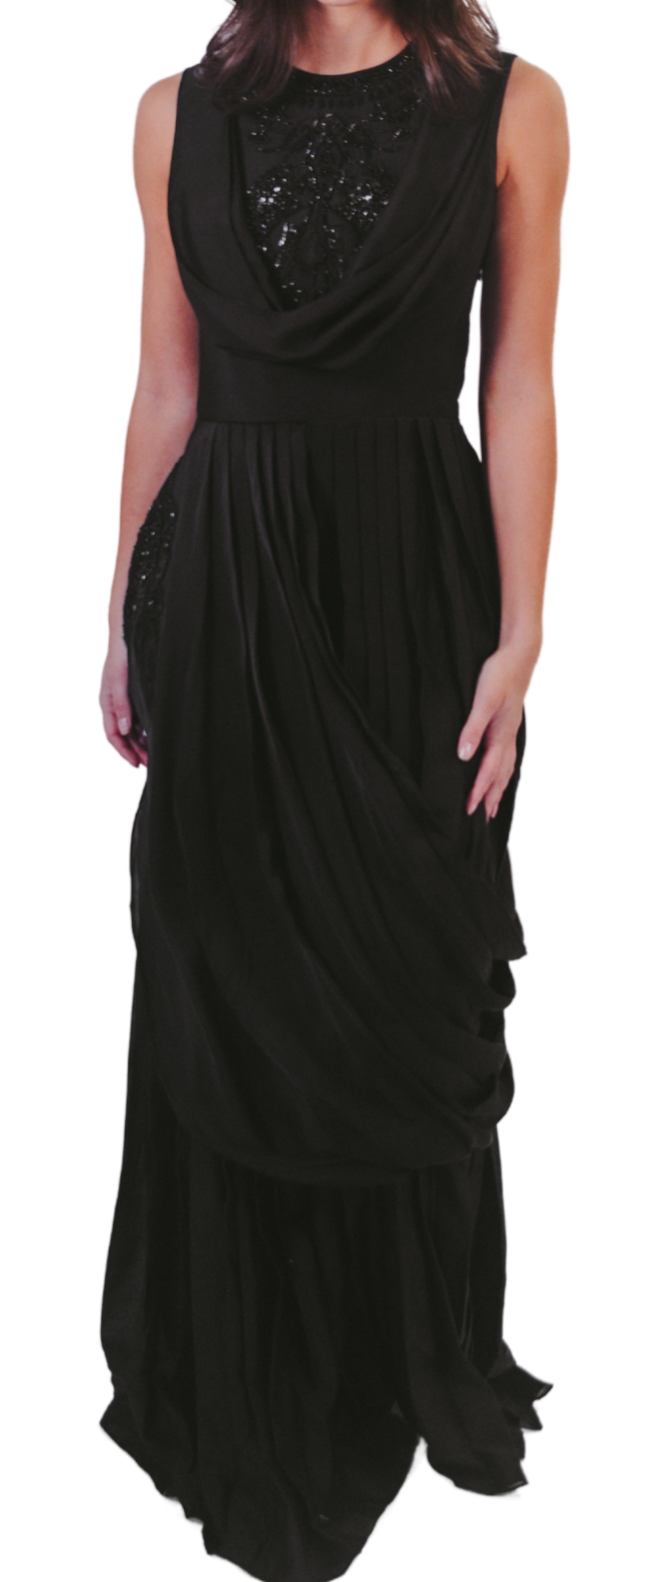 Sequinned Embroidered Black Draped Dress - Preserve